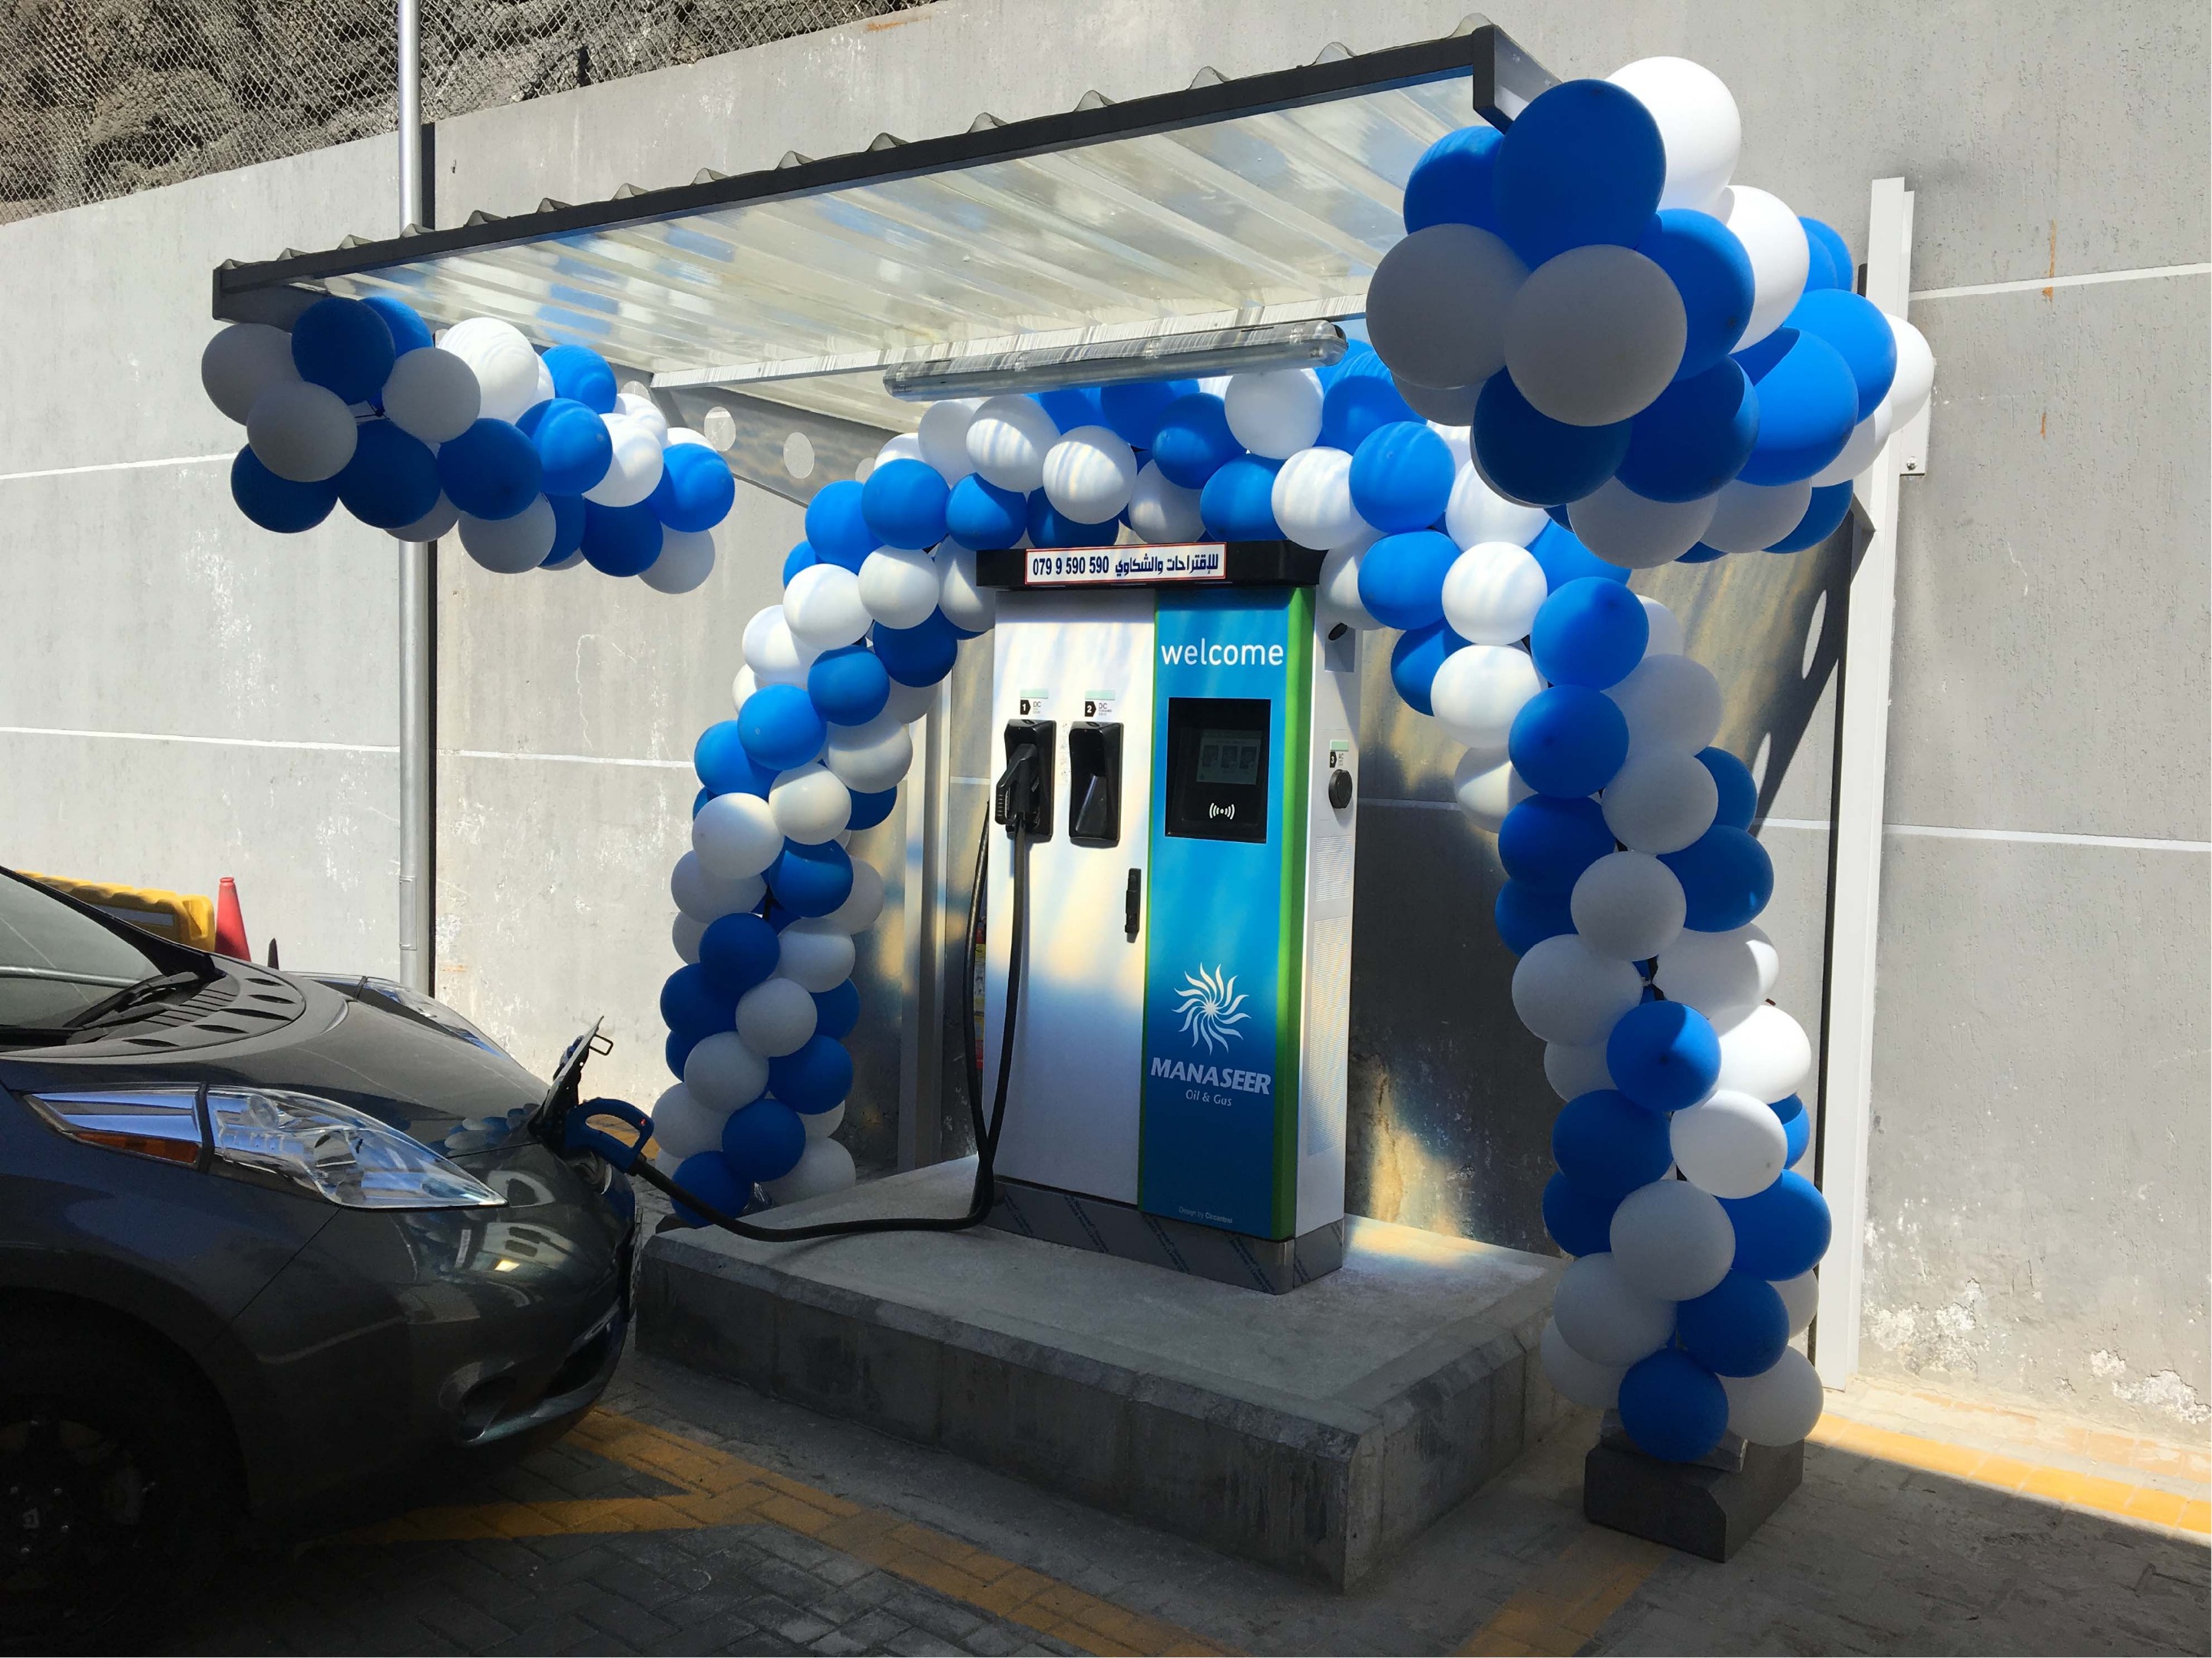 Manaseer Oil & Gas Introduces Fast-Charging Units at Its Stations